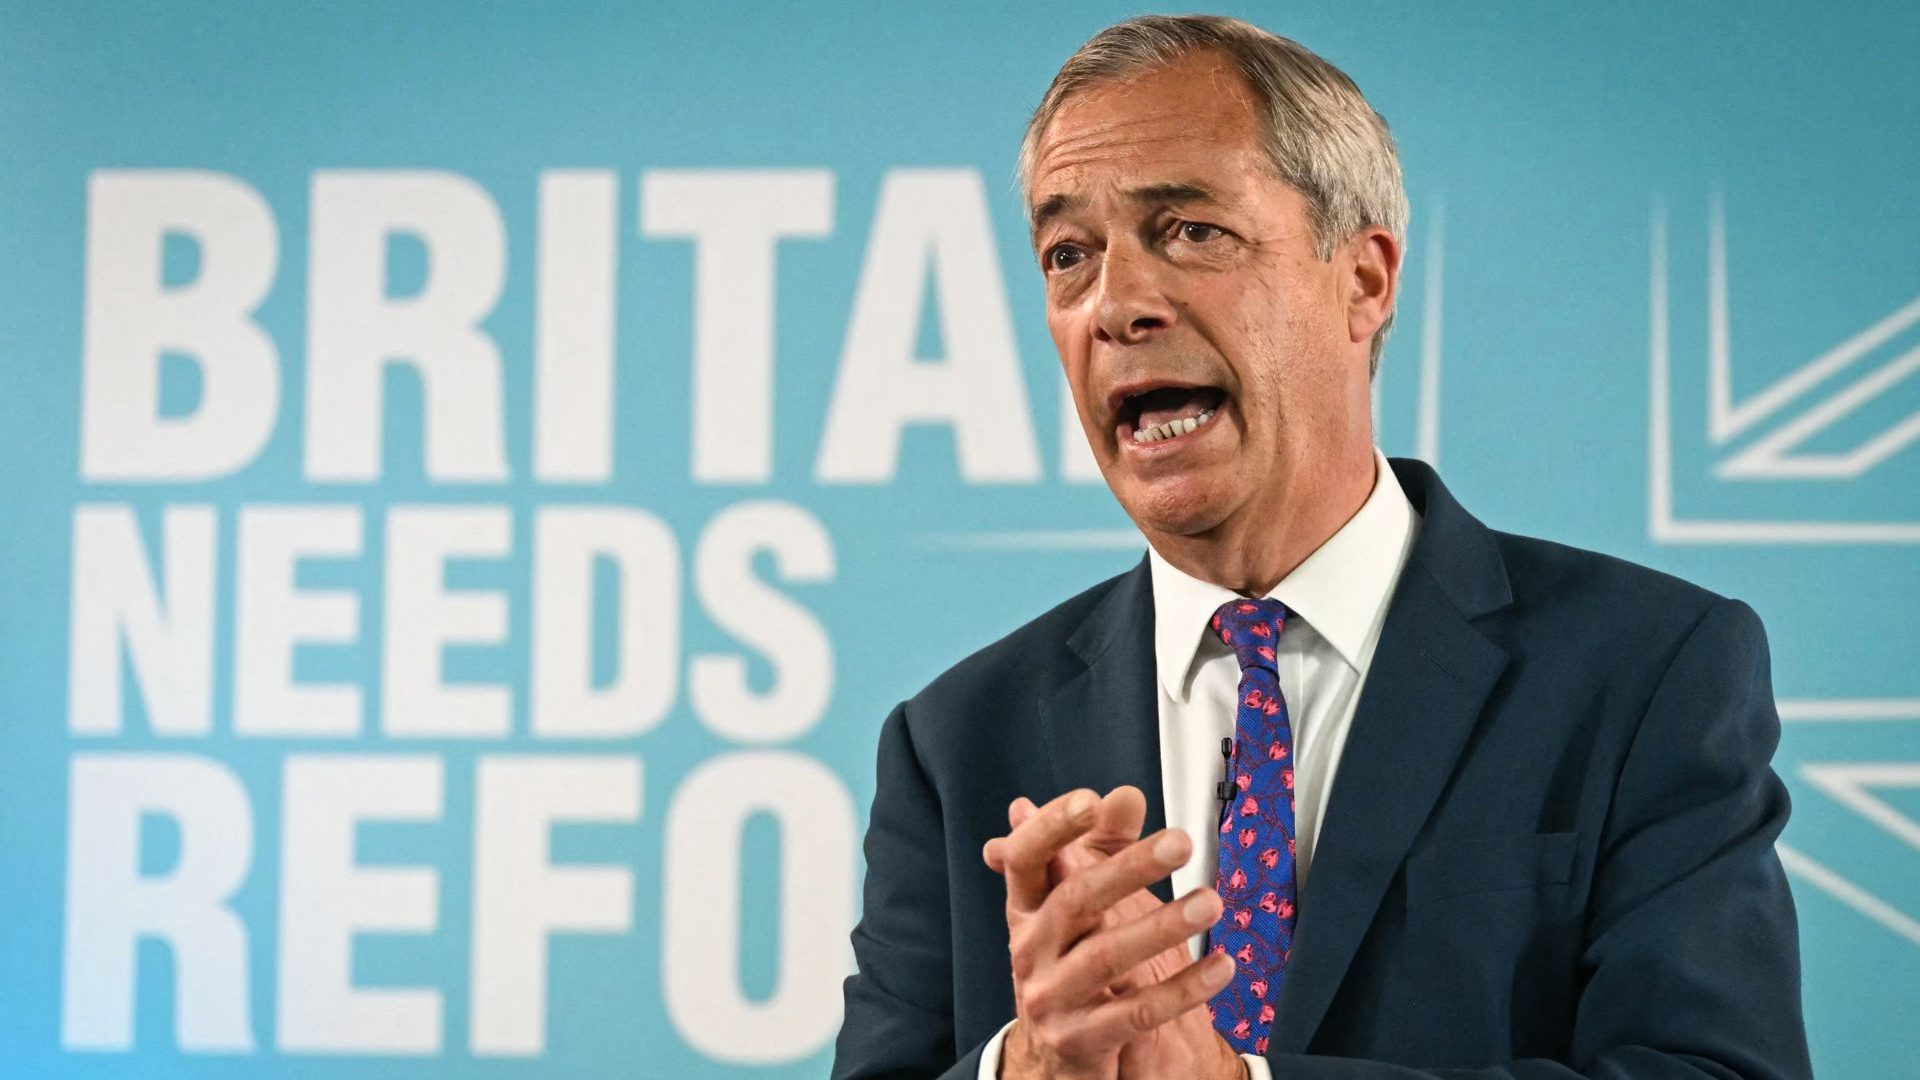 Reform UK Nigel Farage delivers a speech to launch the party's general election manifesto in Merthyr Tydfil (Photo by JUSTIN TALLIS/AFP via Getty Images)